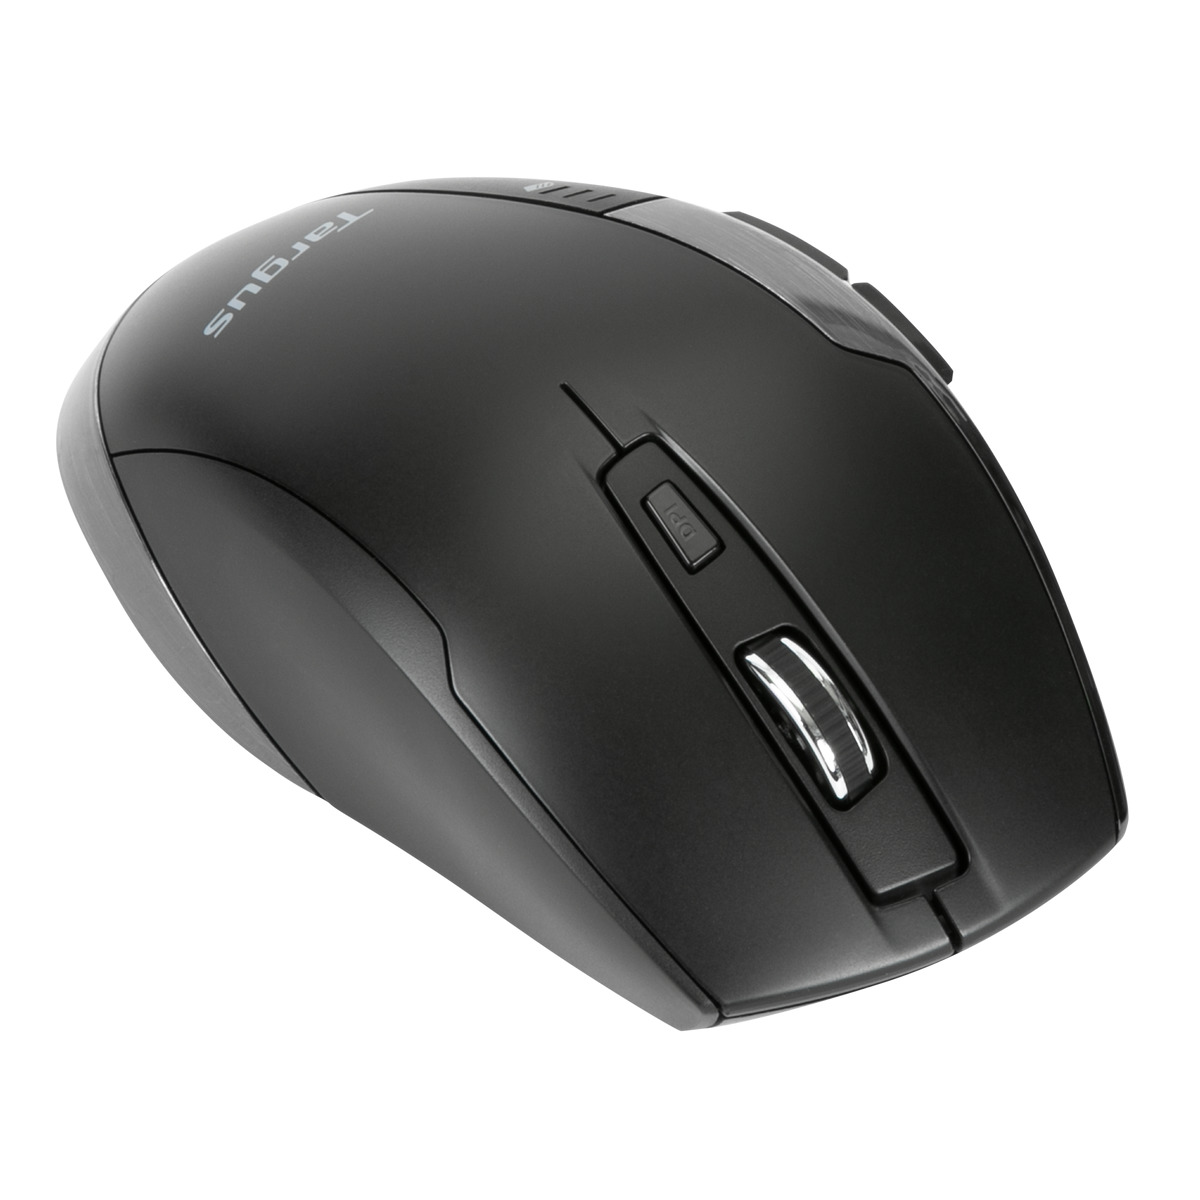  - Mouse inalmbrico antimicrobial blue Trace Targus 4